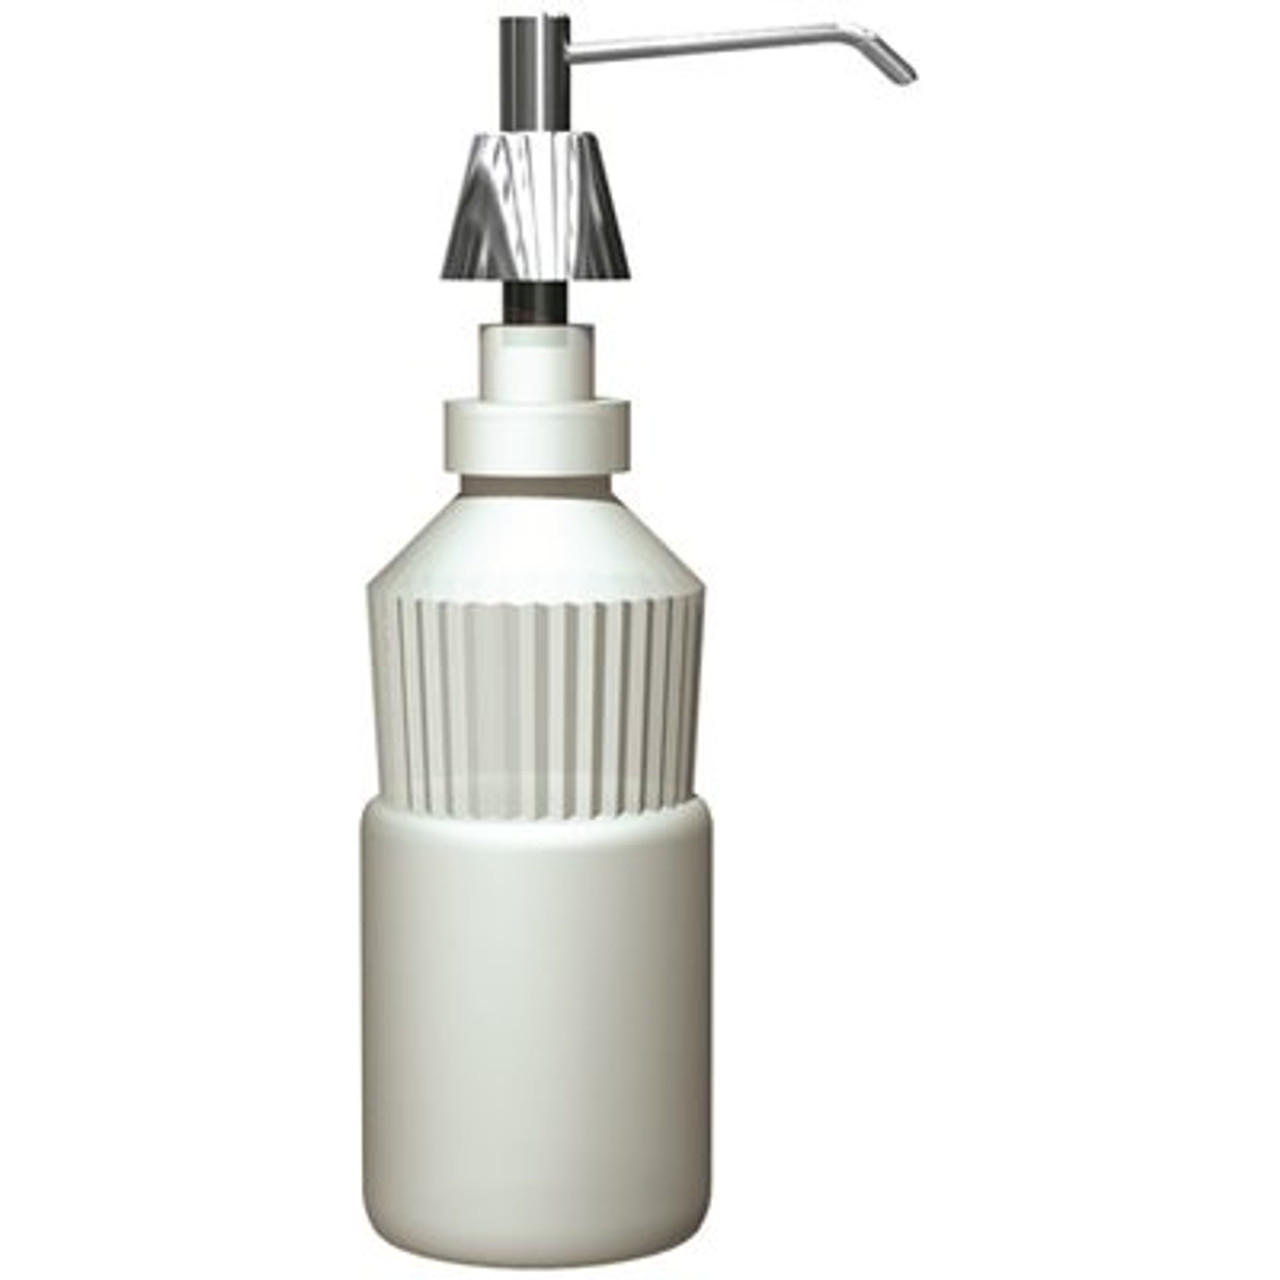 20 fl. oz. Counter Top Mounted Commercial Lavatory Basin Soap Dispenser in Chrome - 314963465